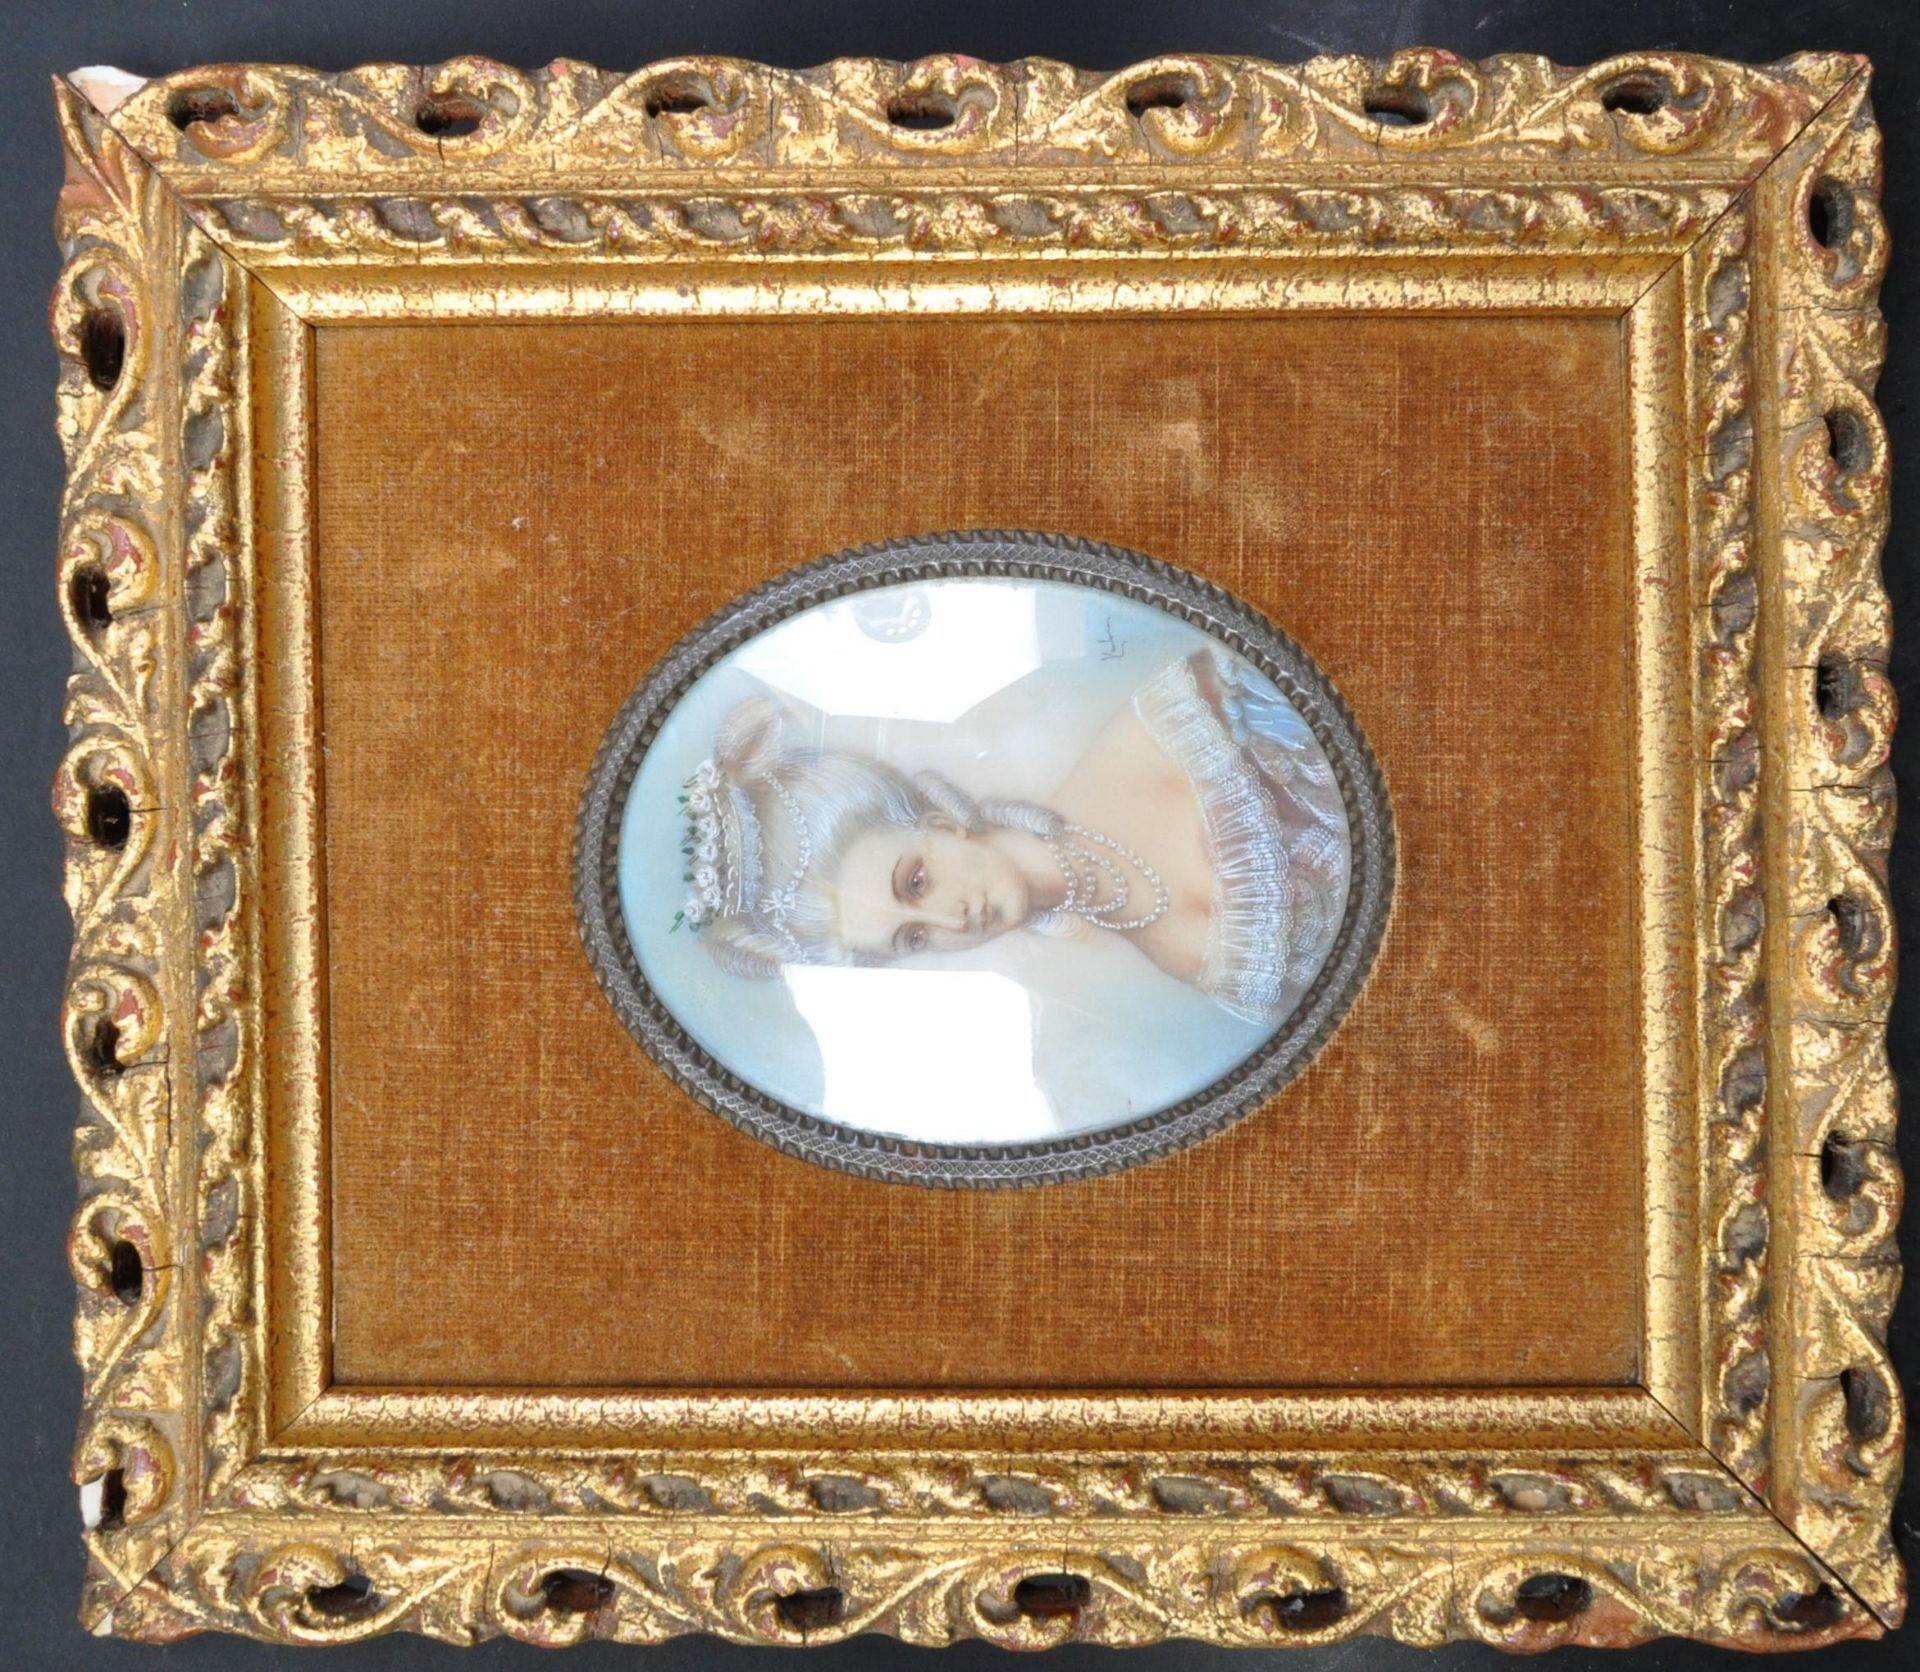 19TH CENTURY HAND PAINTED PORTRAIT OF A LADY - Image 2 of 4